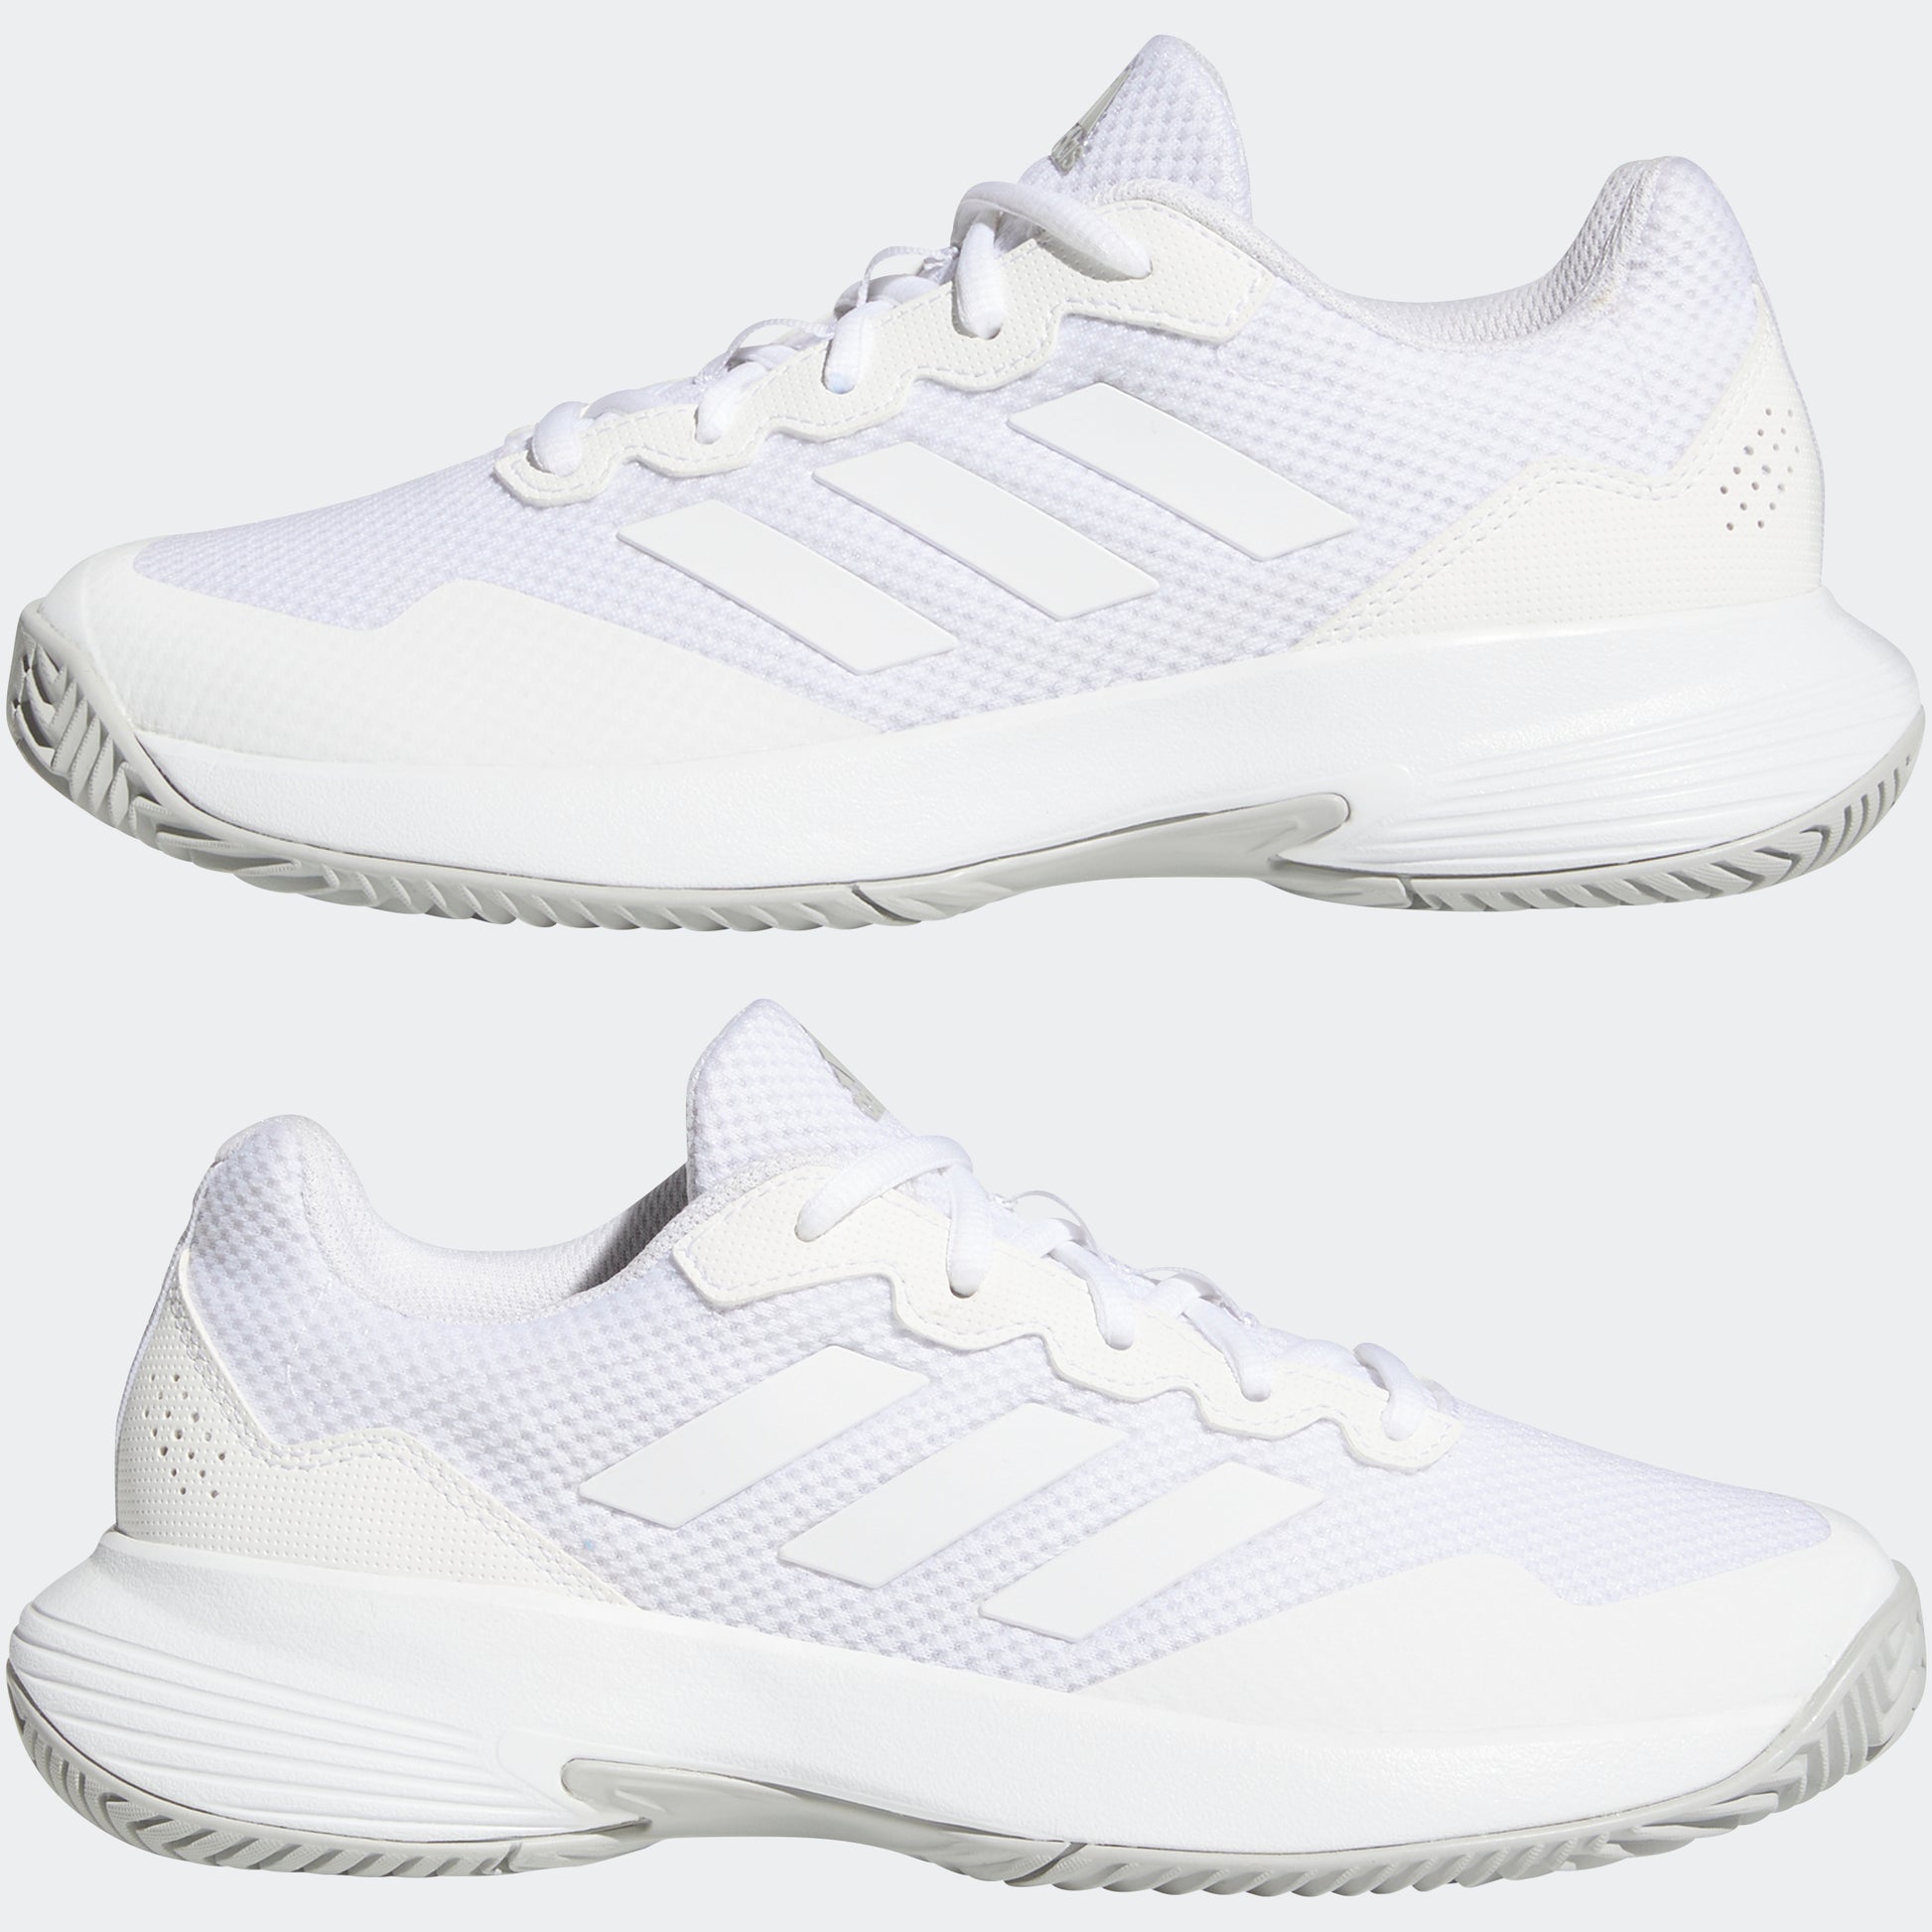 adidas Comes Through With Another Perfect All-White Tennis Shoe 